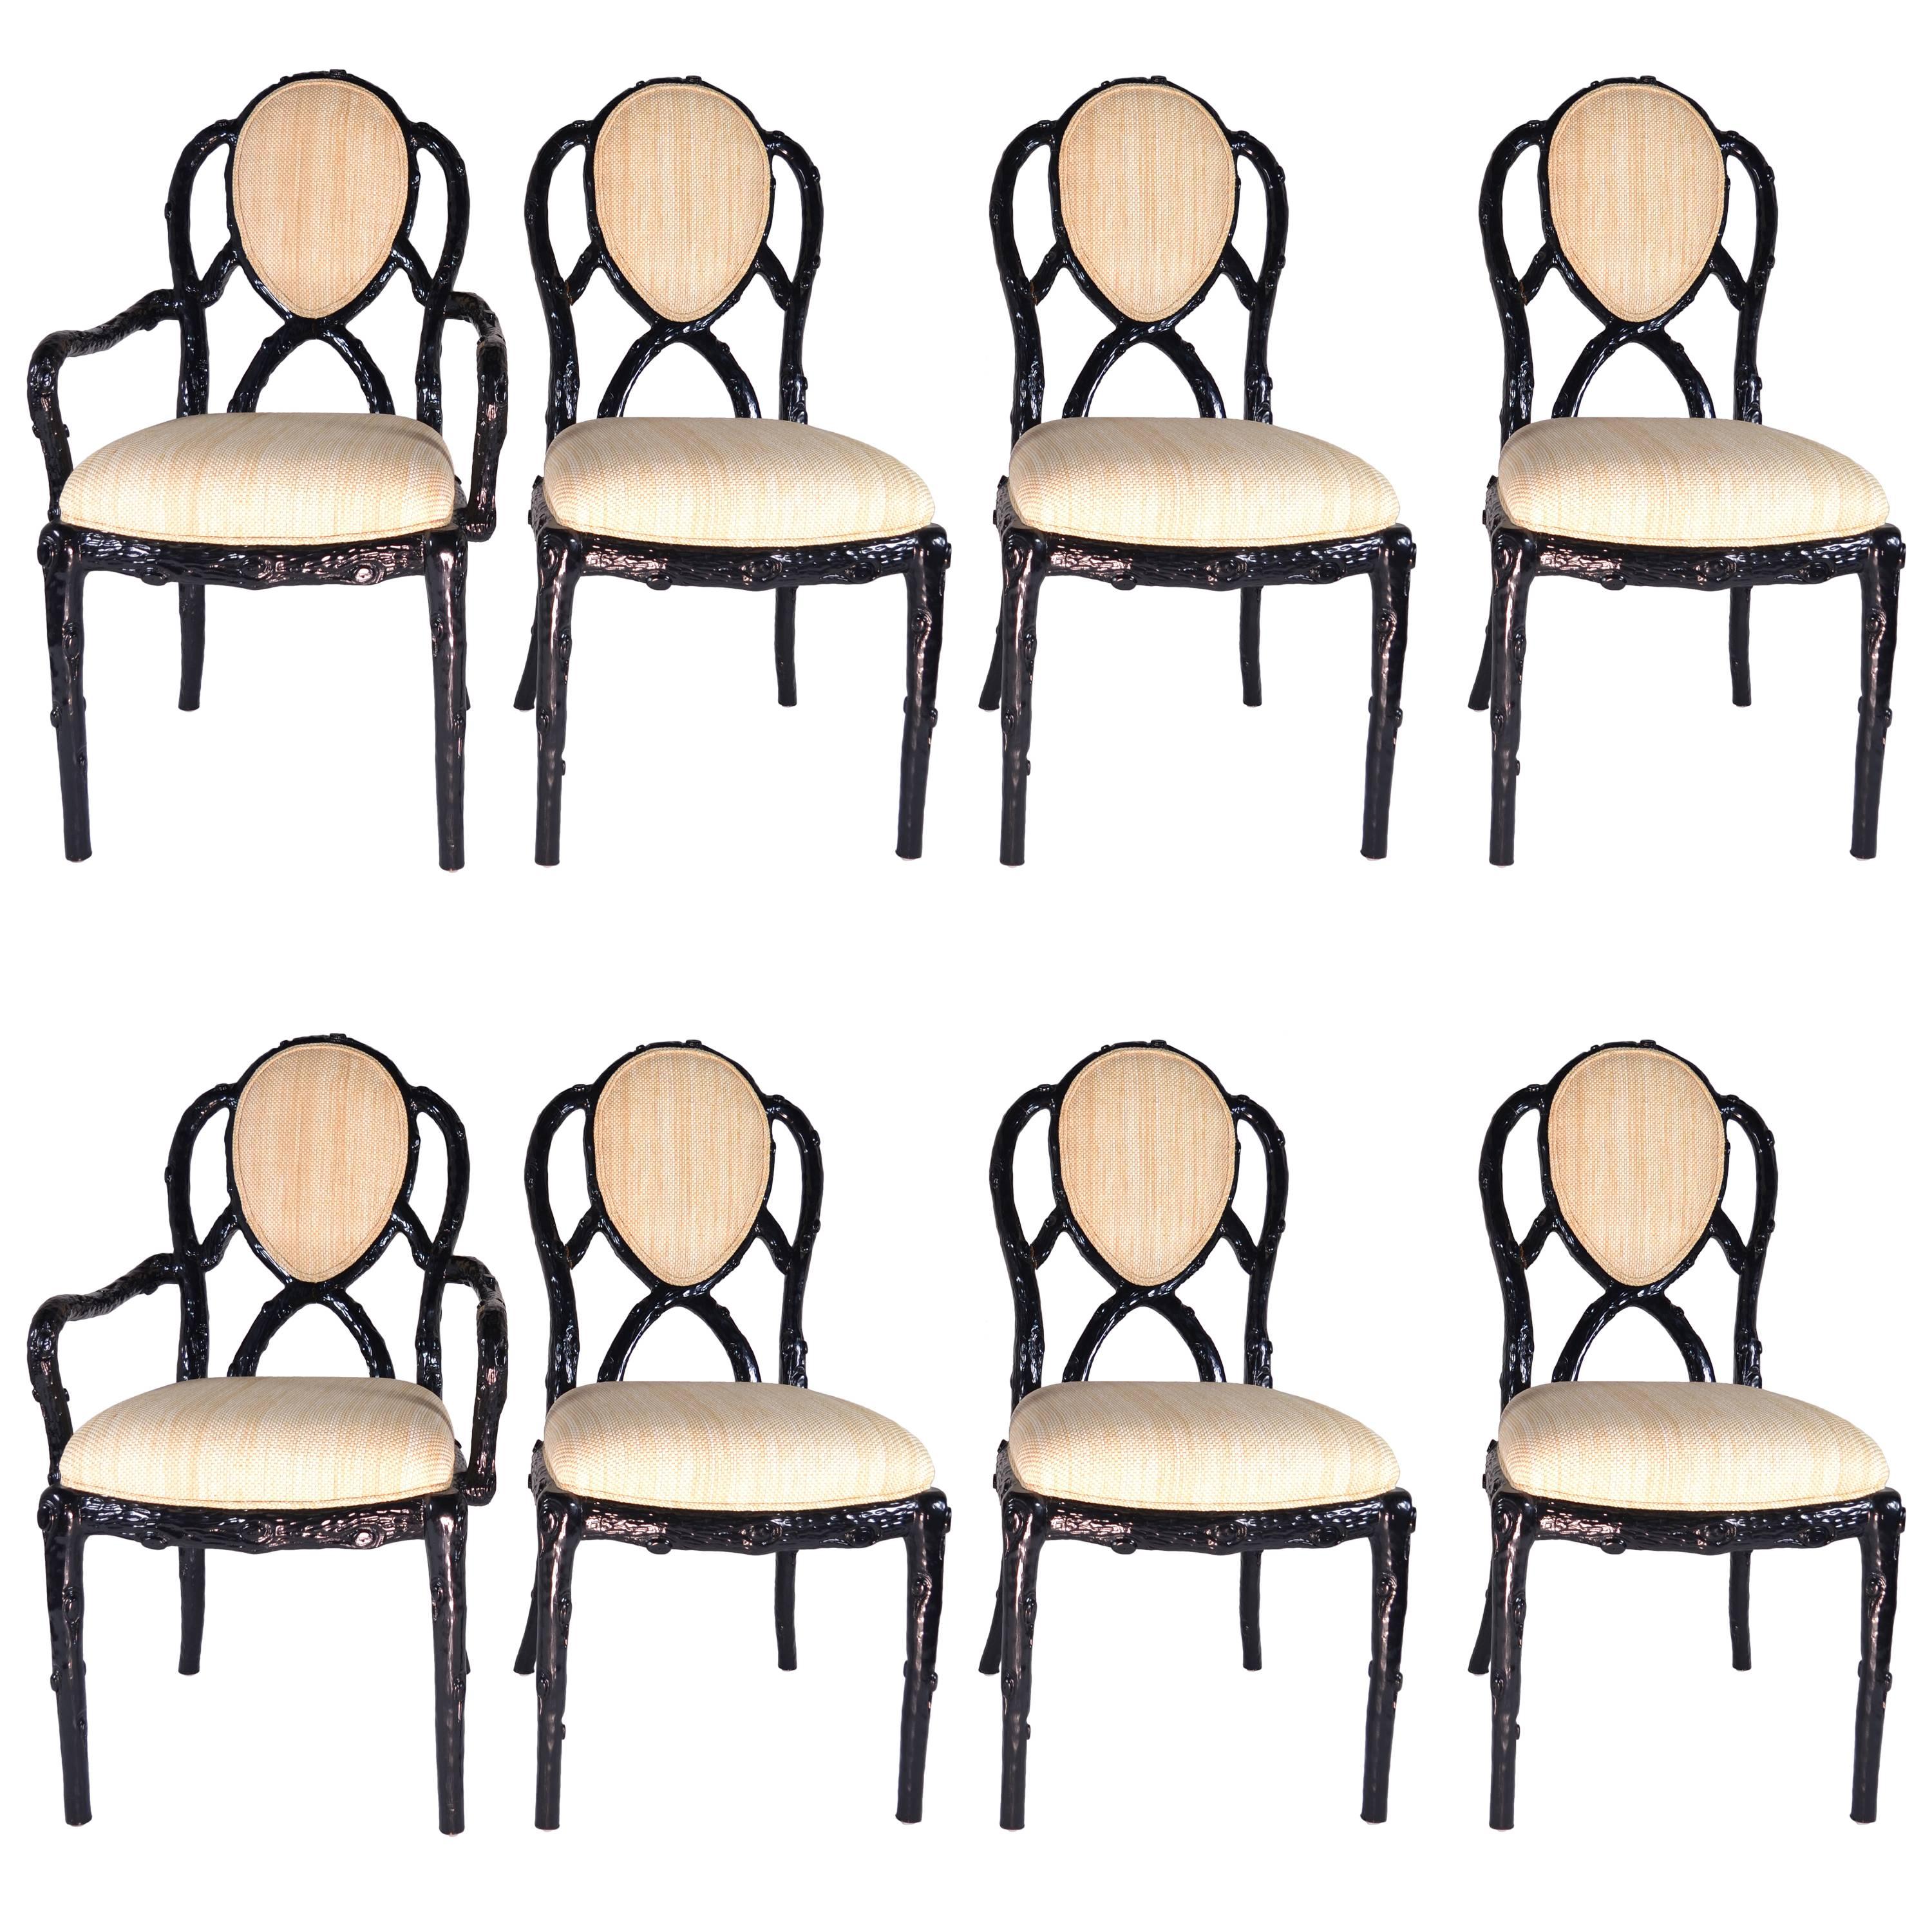 Set of Eight Faux Bois Dining Chairs in Black Lacquer